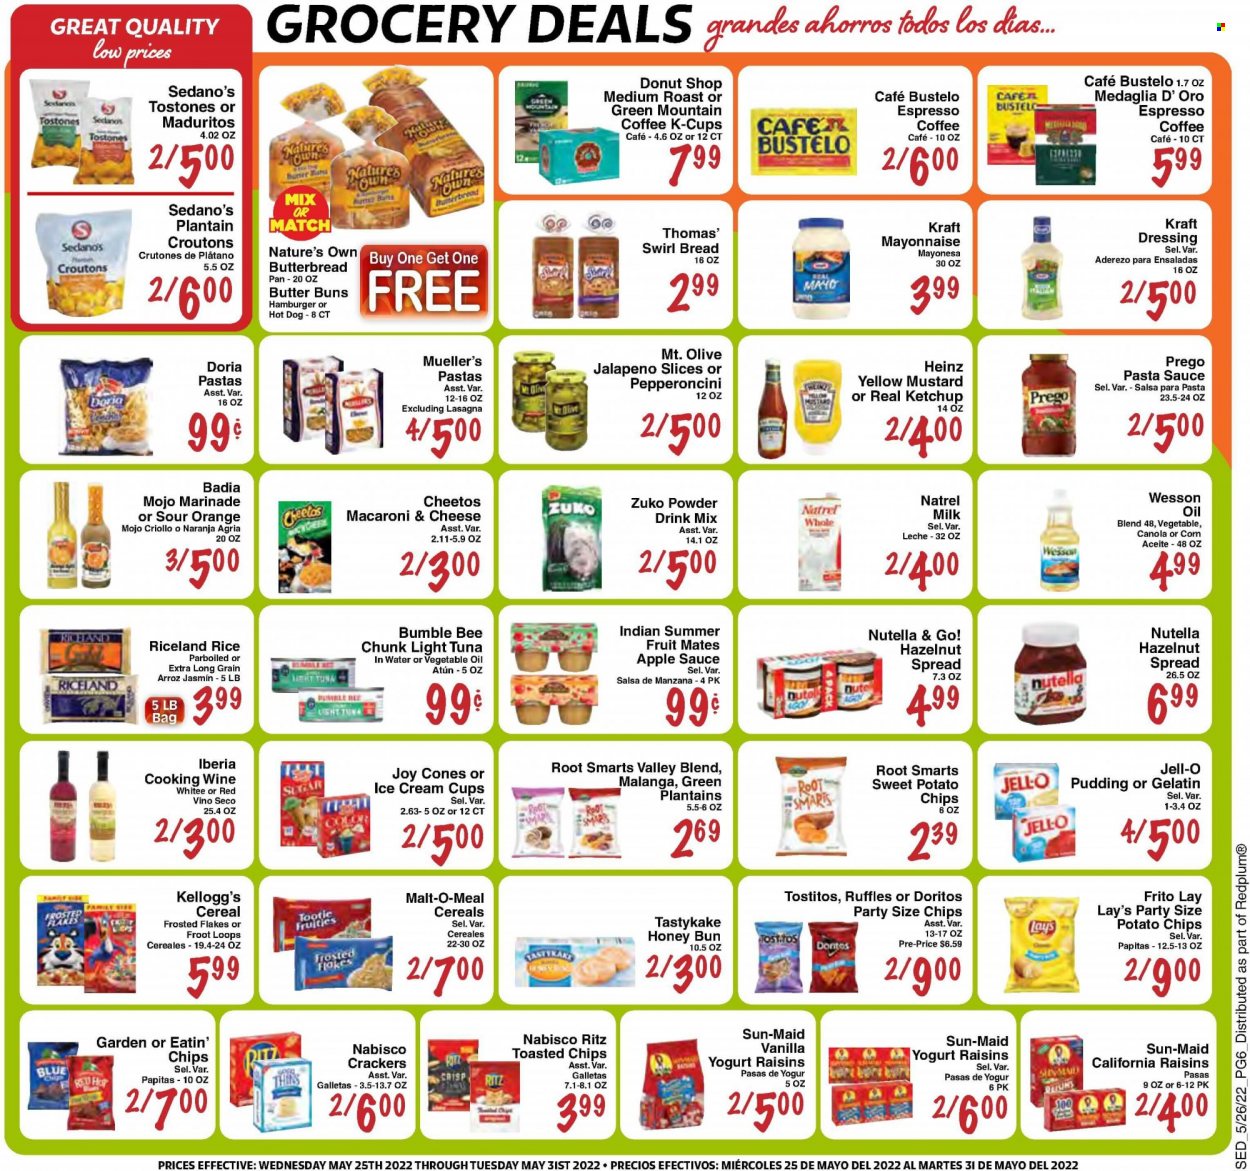 thumbnail - Sedano's Flyer - 05/25/2022 - 05/31/2022 - Sales products - bread, buns, corn, sweet potato, jalapeño, oranges, tuna, macaroni & cheese, hot dog, pasta sauce, hamburger, Bumble Bee, sauce, Kraft®, pudding, yoghurt, milk, ice cream, Nutella, crackers, Kellogg's, RITZ, Doritos, potato chips, Cheetos, chips, Lay’s, Ruffles, Tostitos, croutons, Jell-O, tuna in water, Heinz, light tuna, Badia, cereals, Frosted Flakes, rice, mustard, ketchup, dressing, salsa, marinade, oil, apple sauce, honey, hazelnut spread, raisins, dried fruit, powder drink, coffee, coffee capsules, K-Cups, Green Mountain, cooking wine, Nature's Own, Go!, plantains. Page 6.